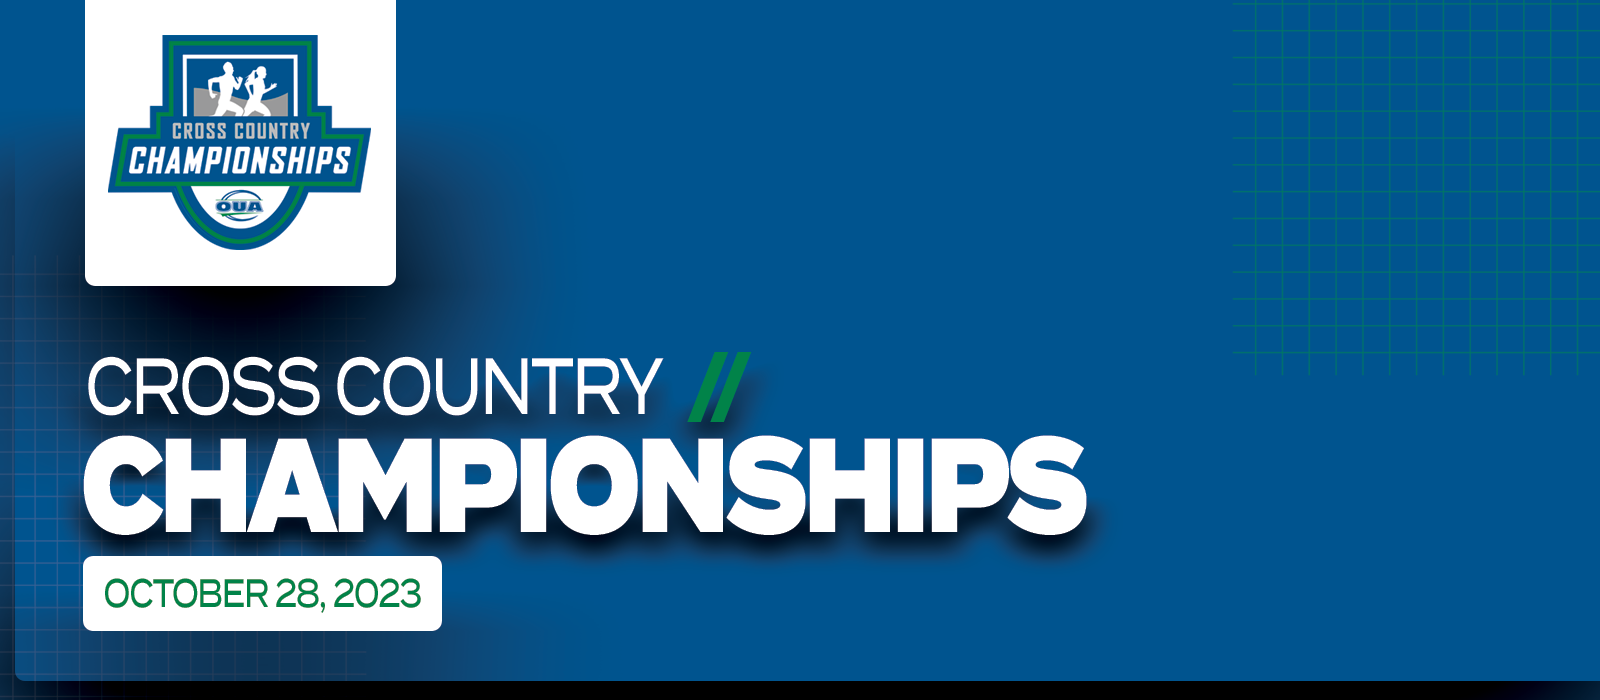 Predominantly blue graphic with large white text on the left side that reads Cross Country Championships, October 28, 2023’ beneath the OUA Cross Country Championships logo